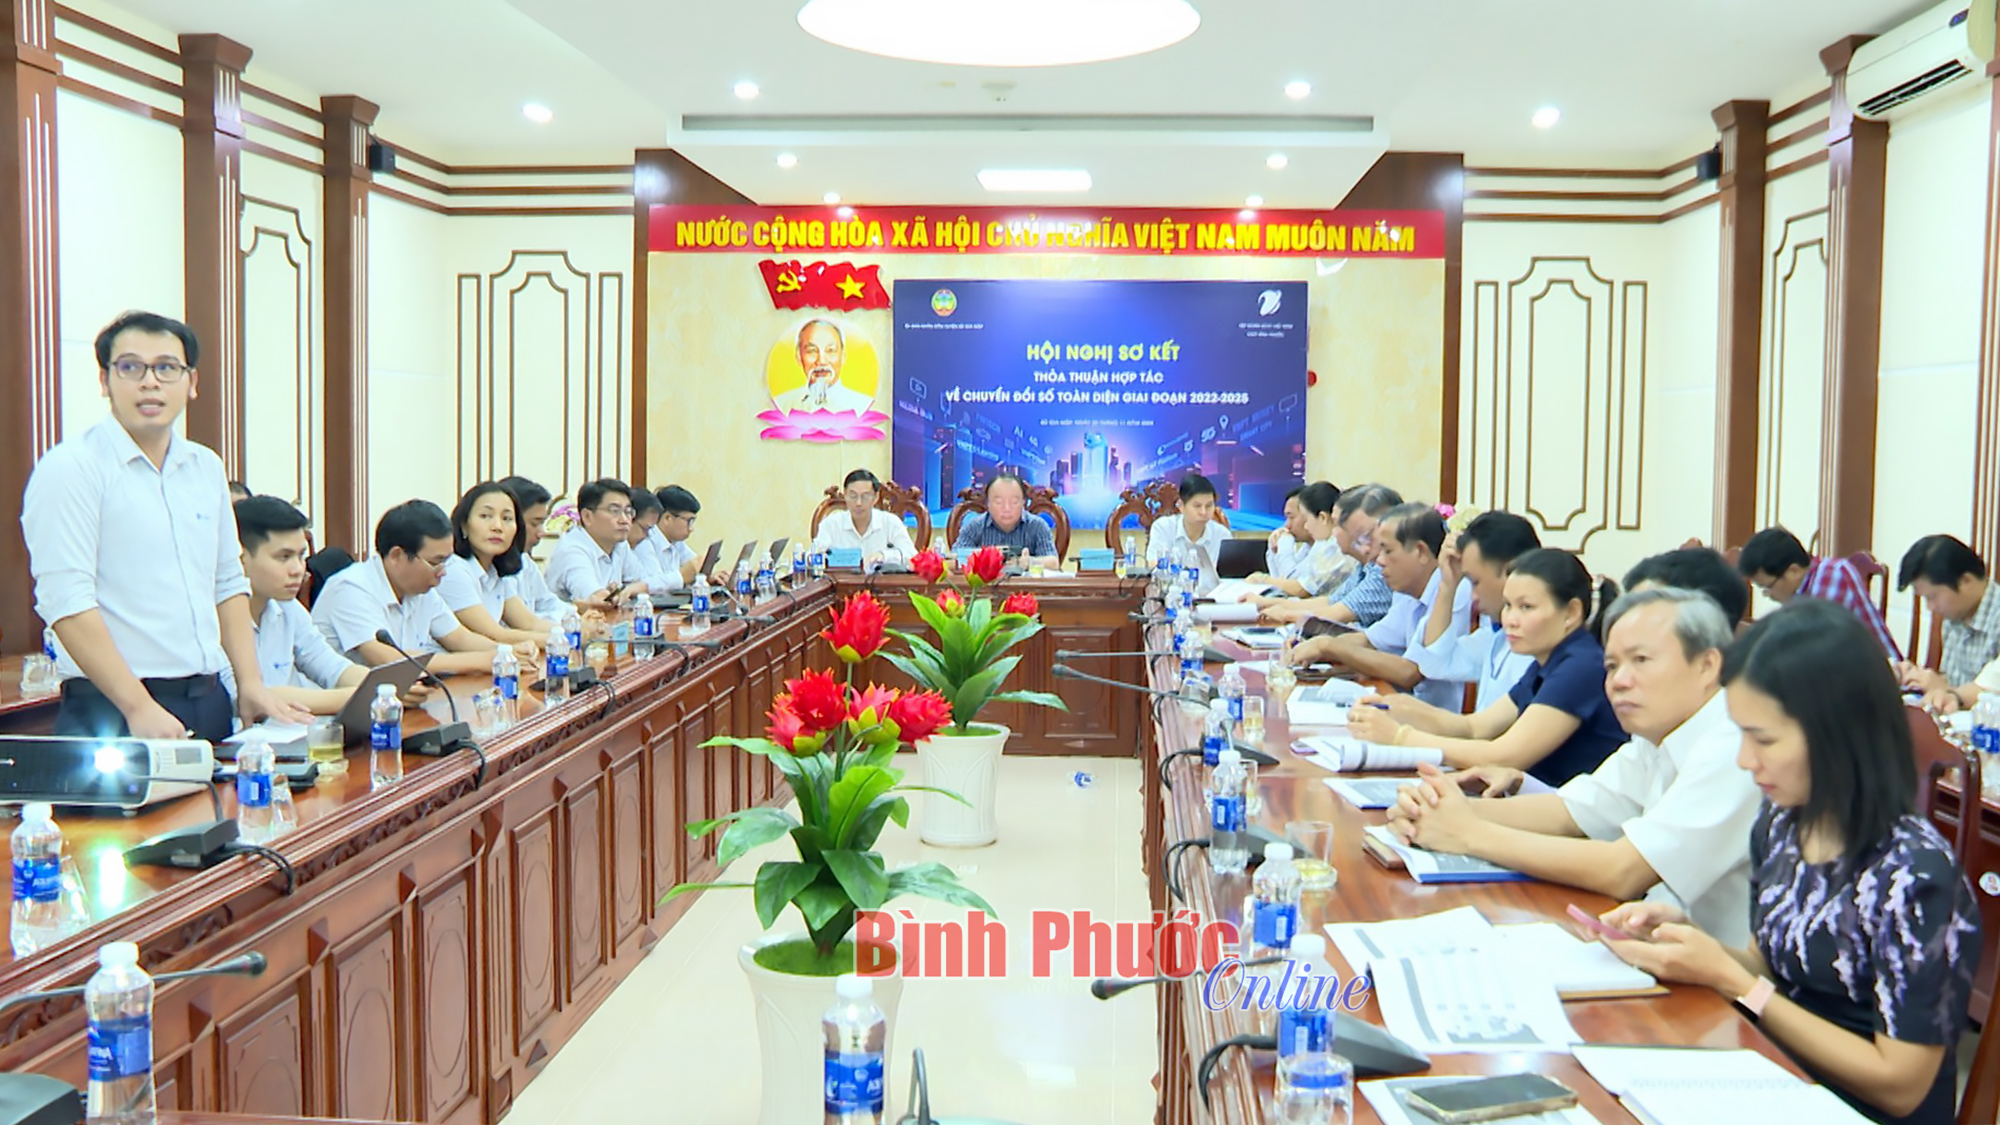 VNPT and Bu Gia Map district make preliminary summing-up of cooperation agreement on digital transformation